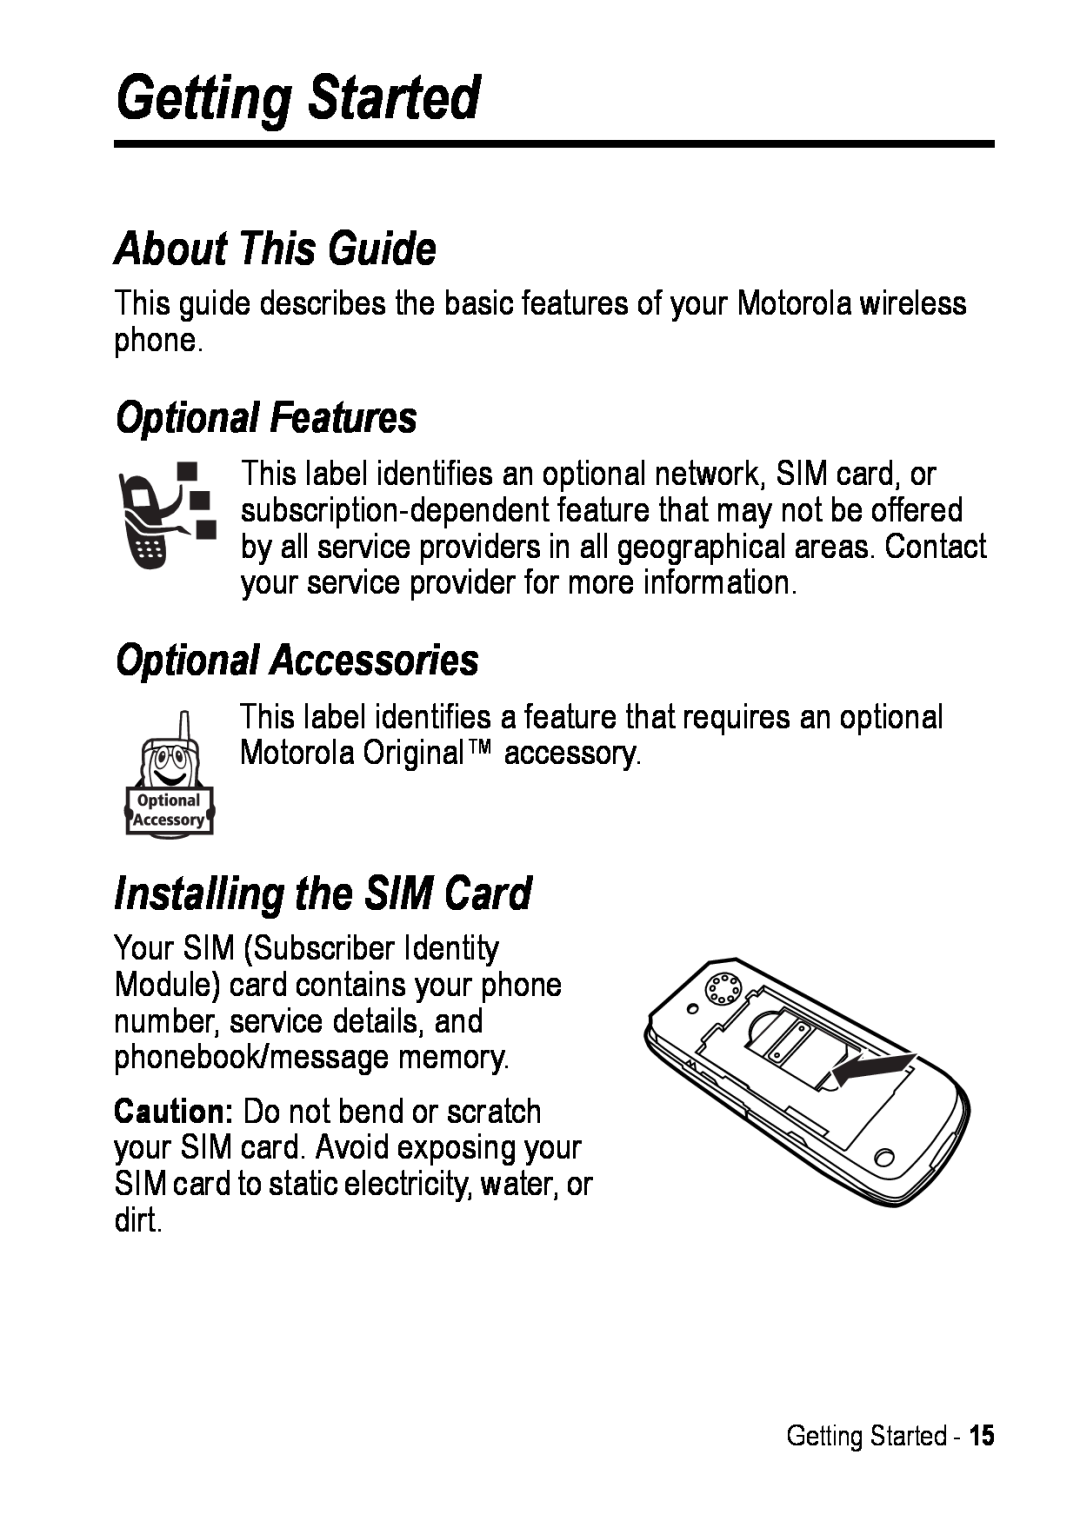 Motorola C390 manual Getting Started, About This Guide, Installing the SIM Card, Optional Features, Optional Accessories 